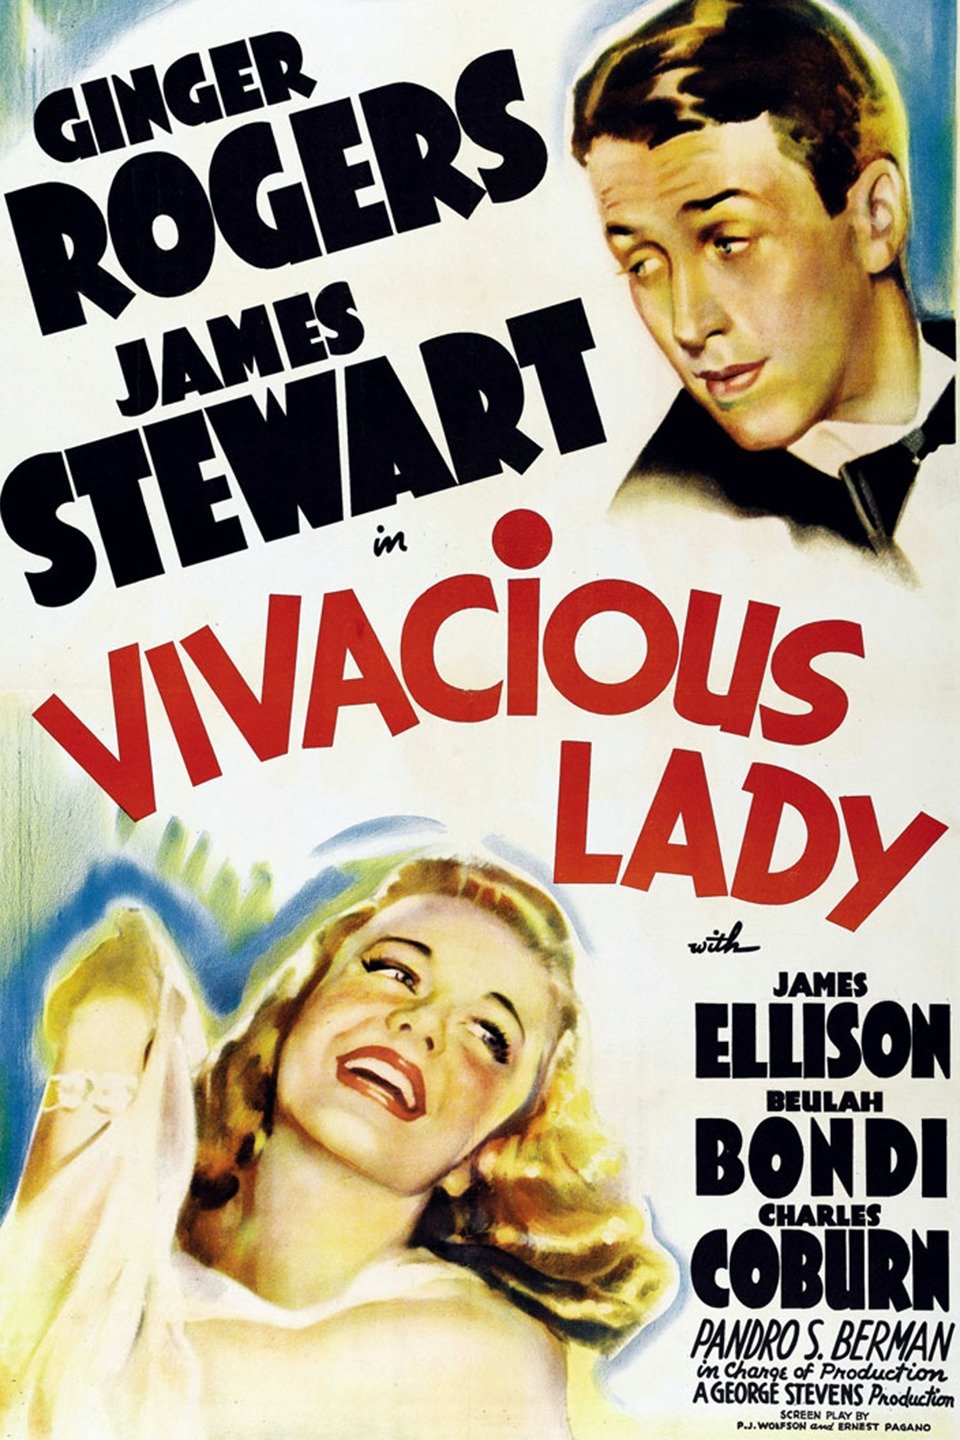 Film Alert 101 On Dvd A Shout Out For Vivacious Lady George Stevens Usa 1938 And A Song By Ginger Rogers